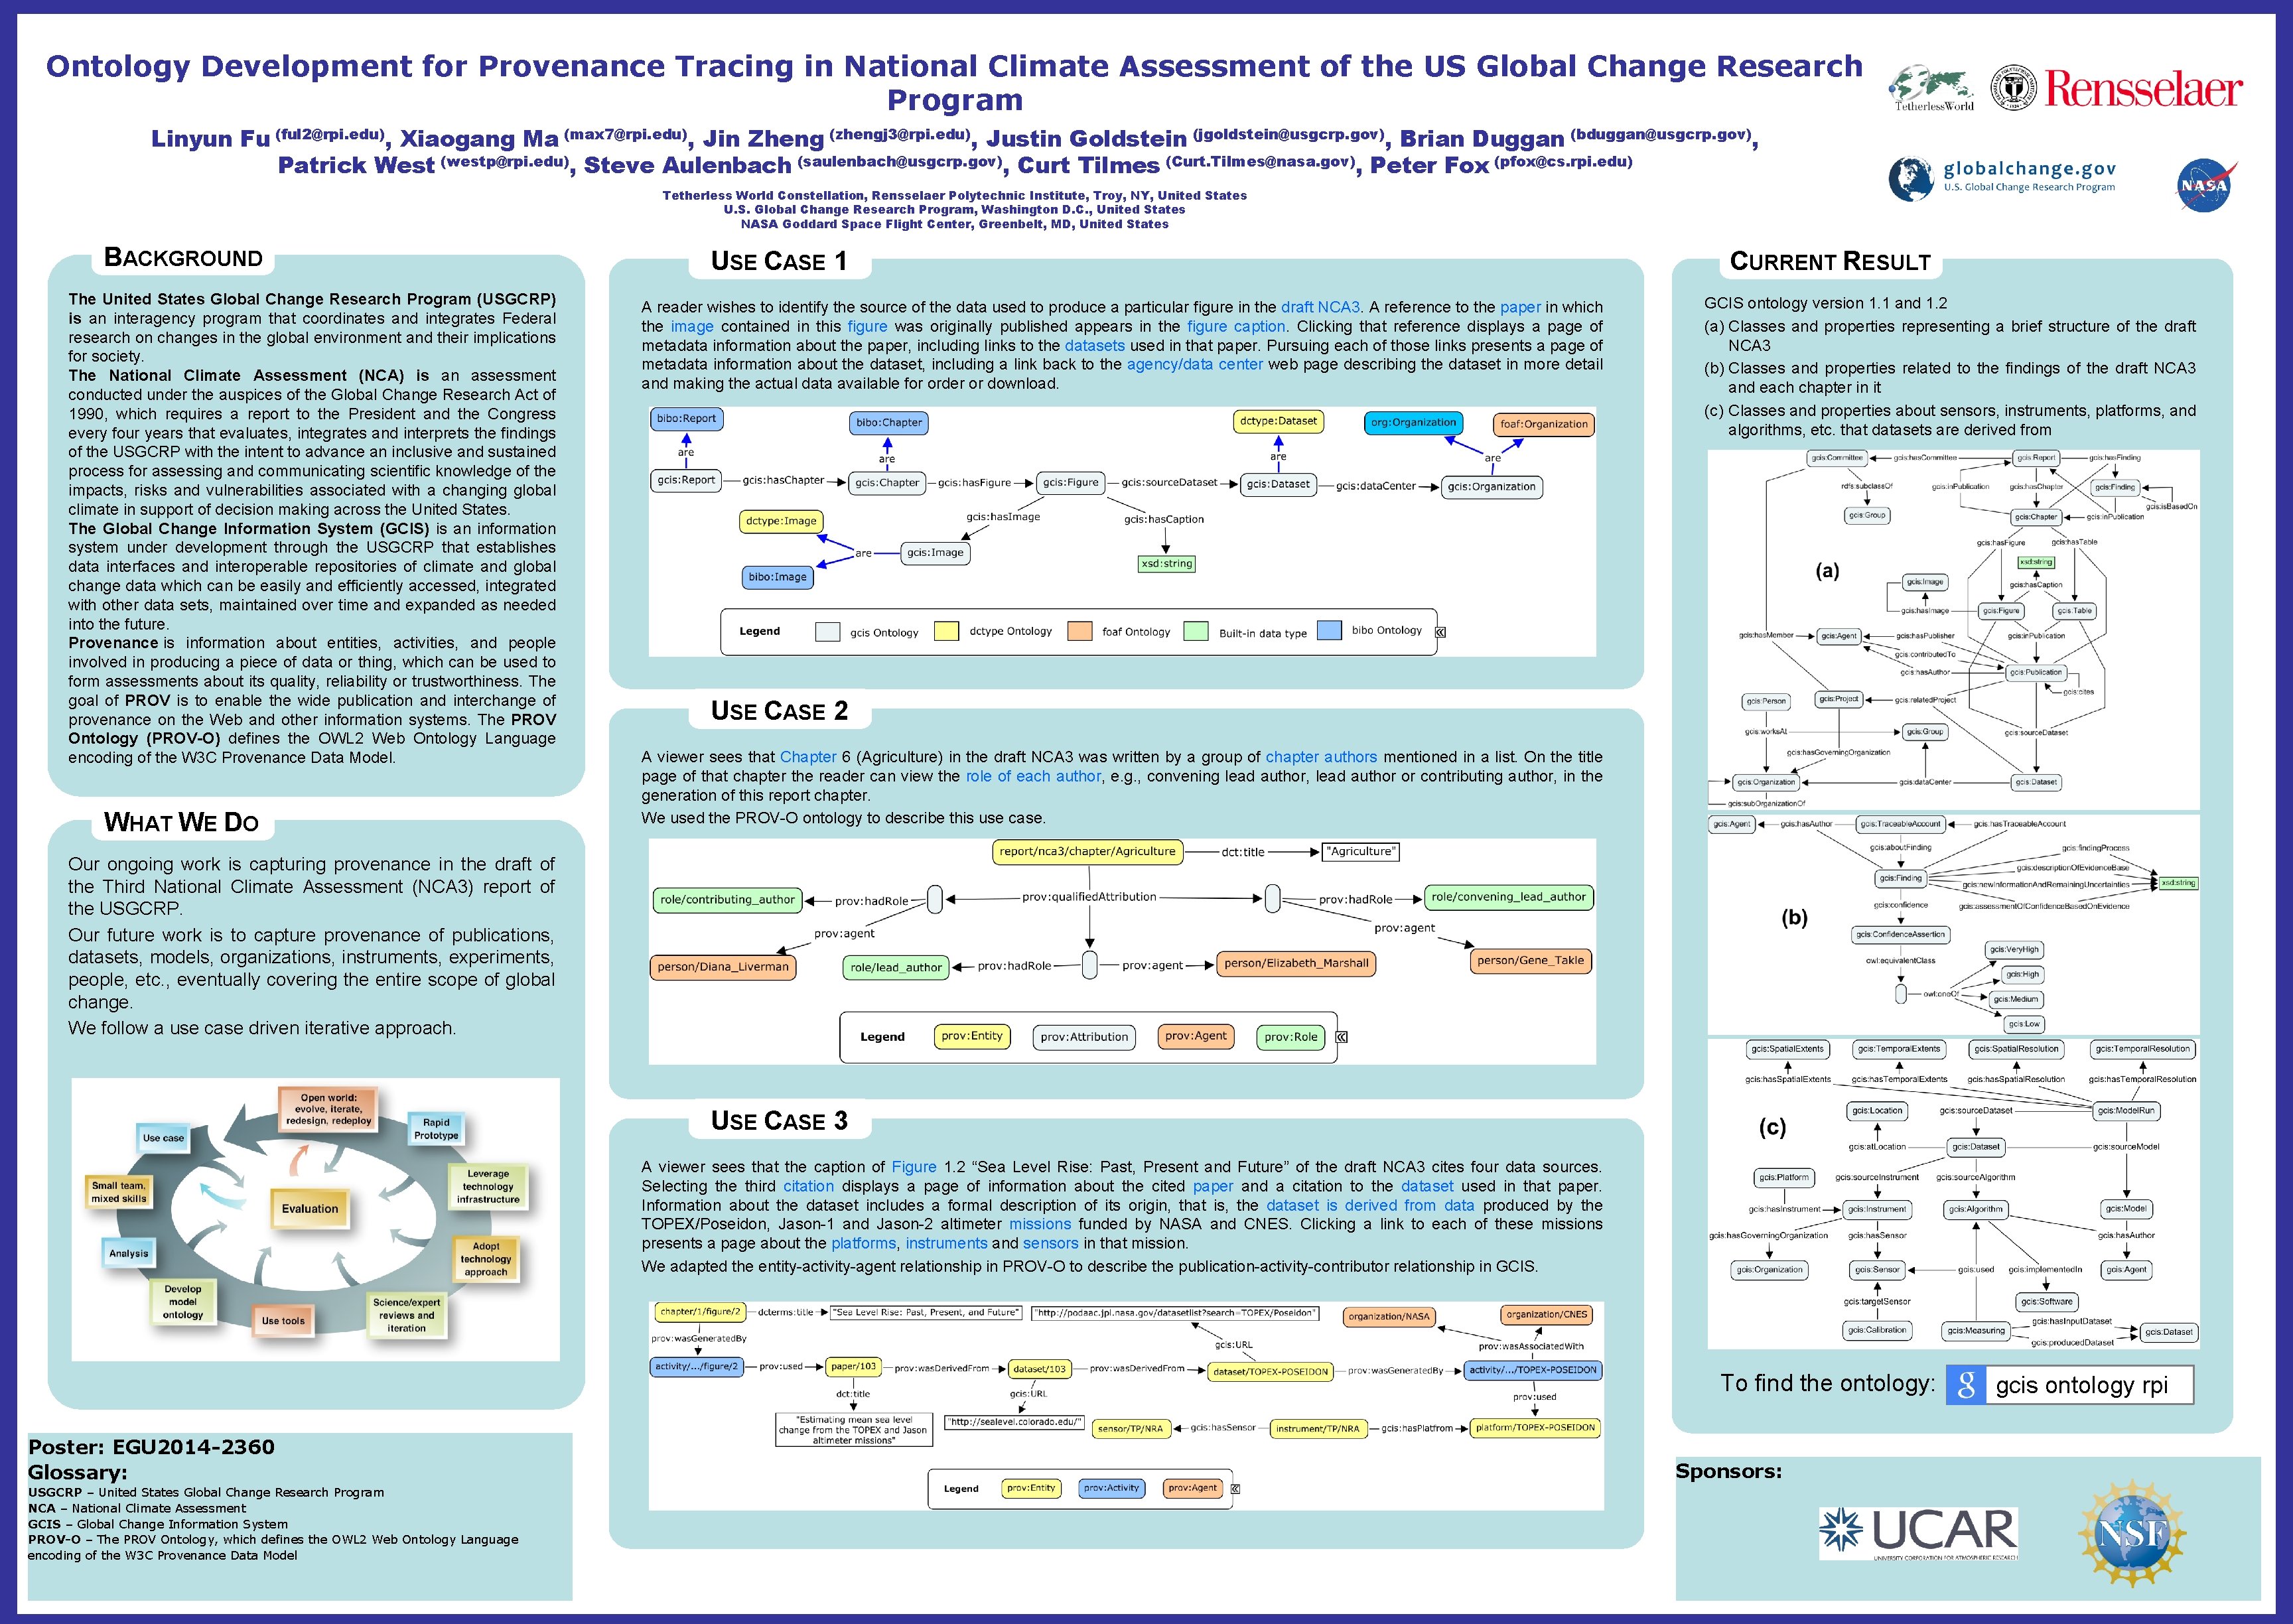 Ontology Development for Provenance Tracing in National Climate Assessment of the US Global Change